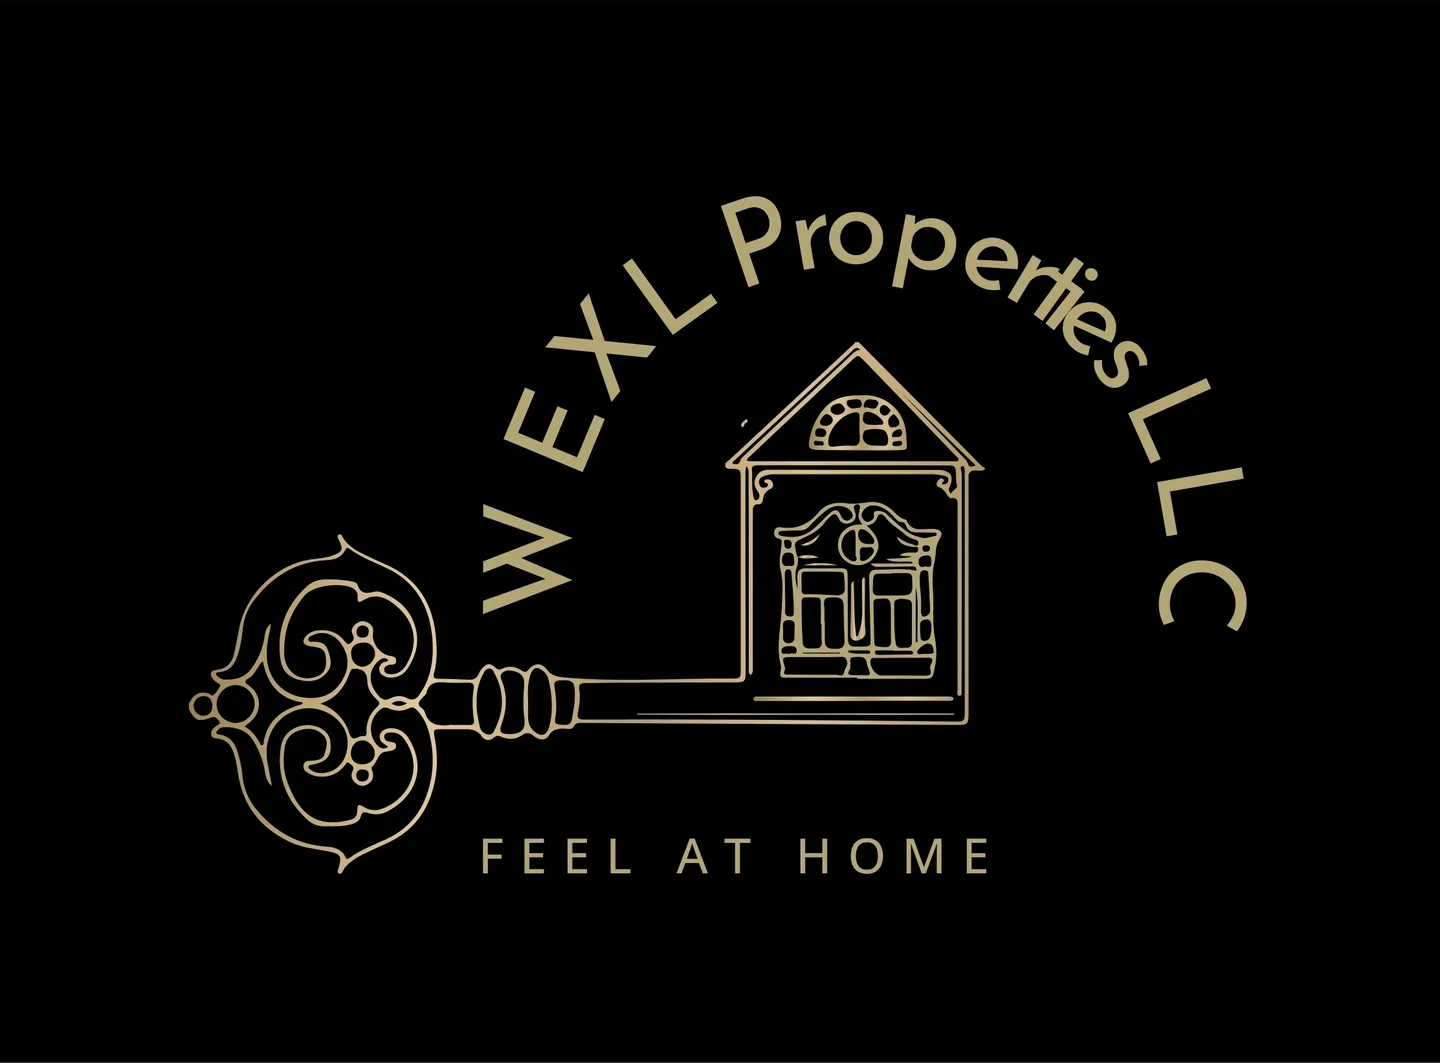 A logo of a house with a key in the center.